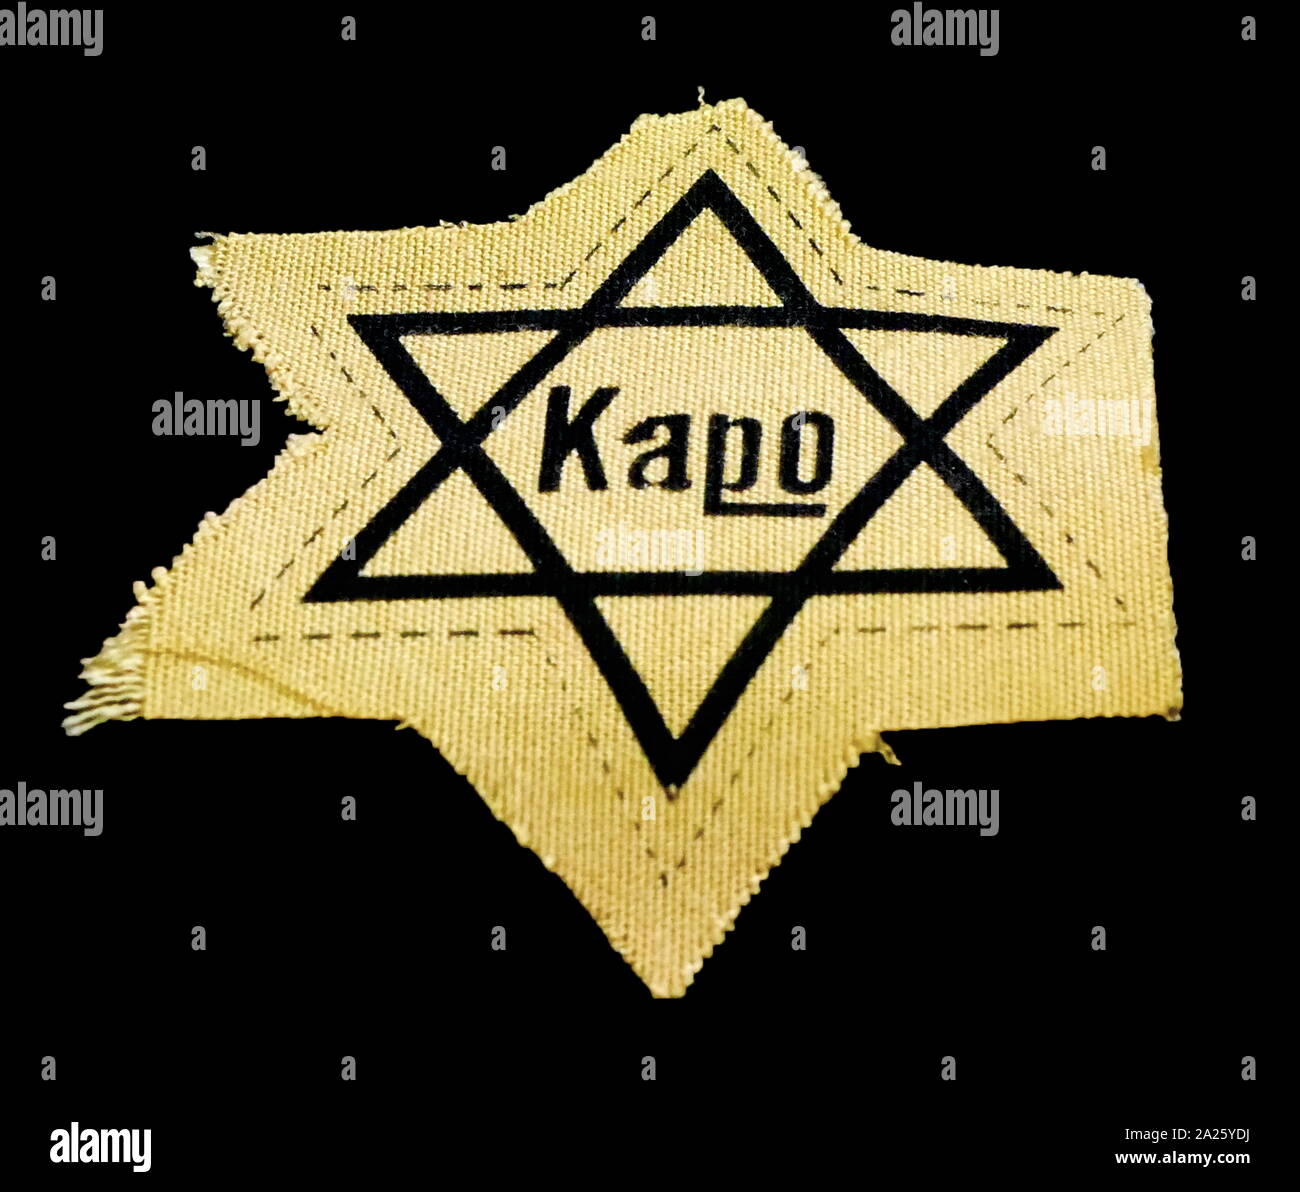 A yellow star worn by kapo in concentration camps. A kapo or prisoner functionary was a prisoner assigned by SS guards to supervise forced labour or carry out administrative tasks. Stock Photo